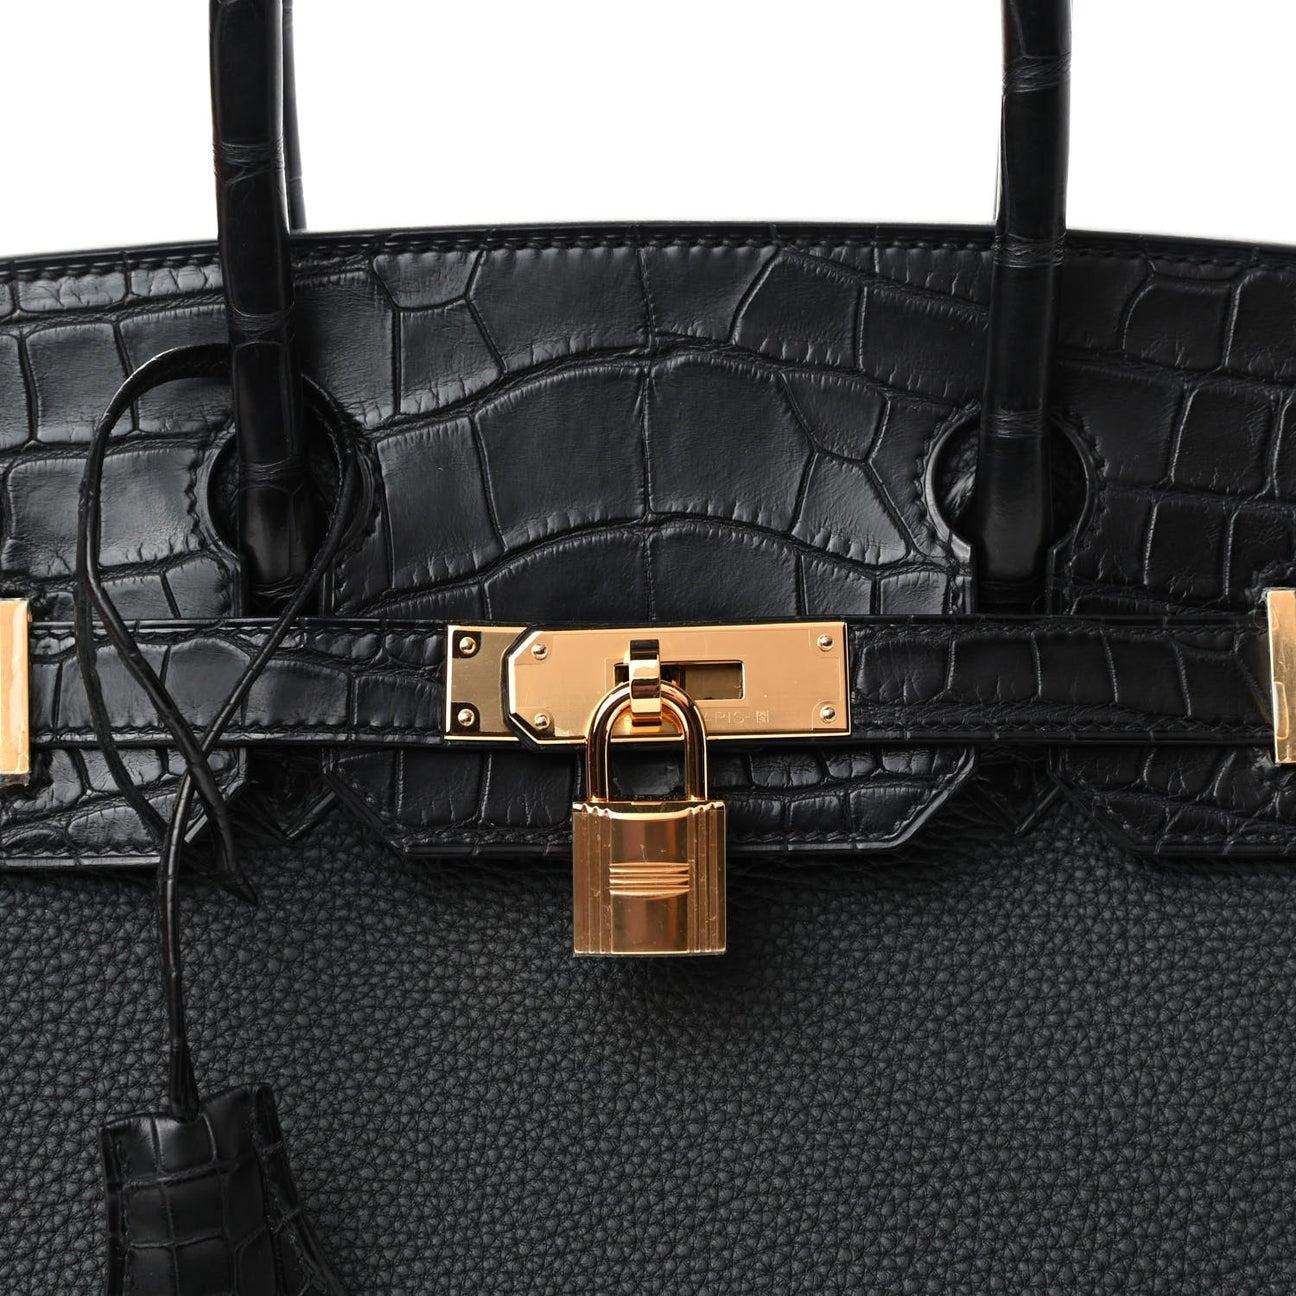 New Condition
From 2020 Collection
Togo Leather
Matte Alligator
Gold Hardware
Measures 11.5